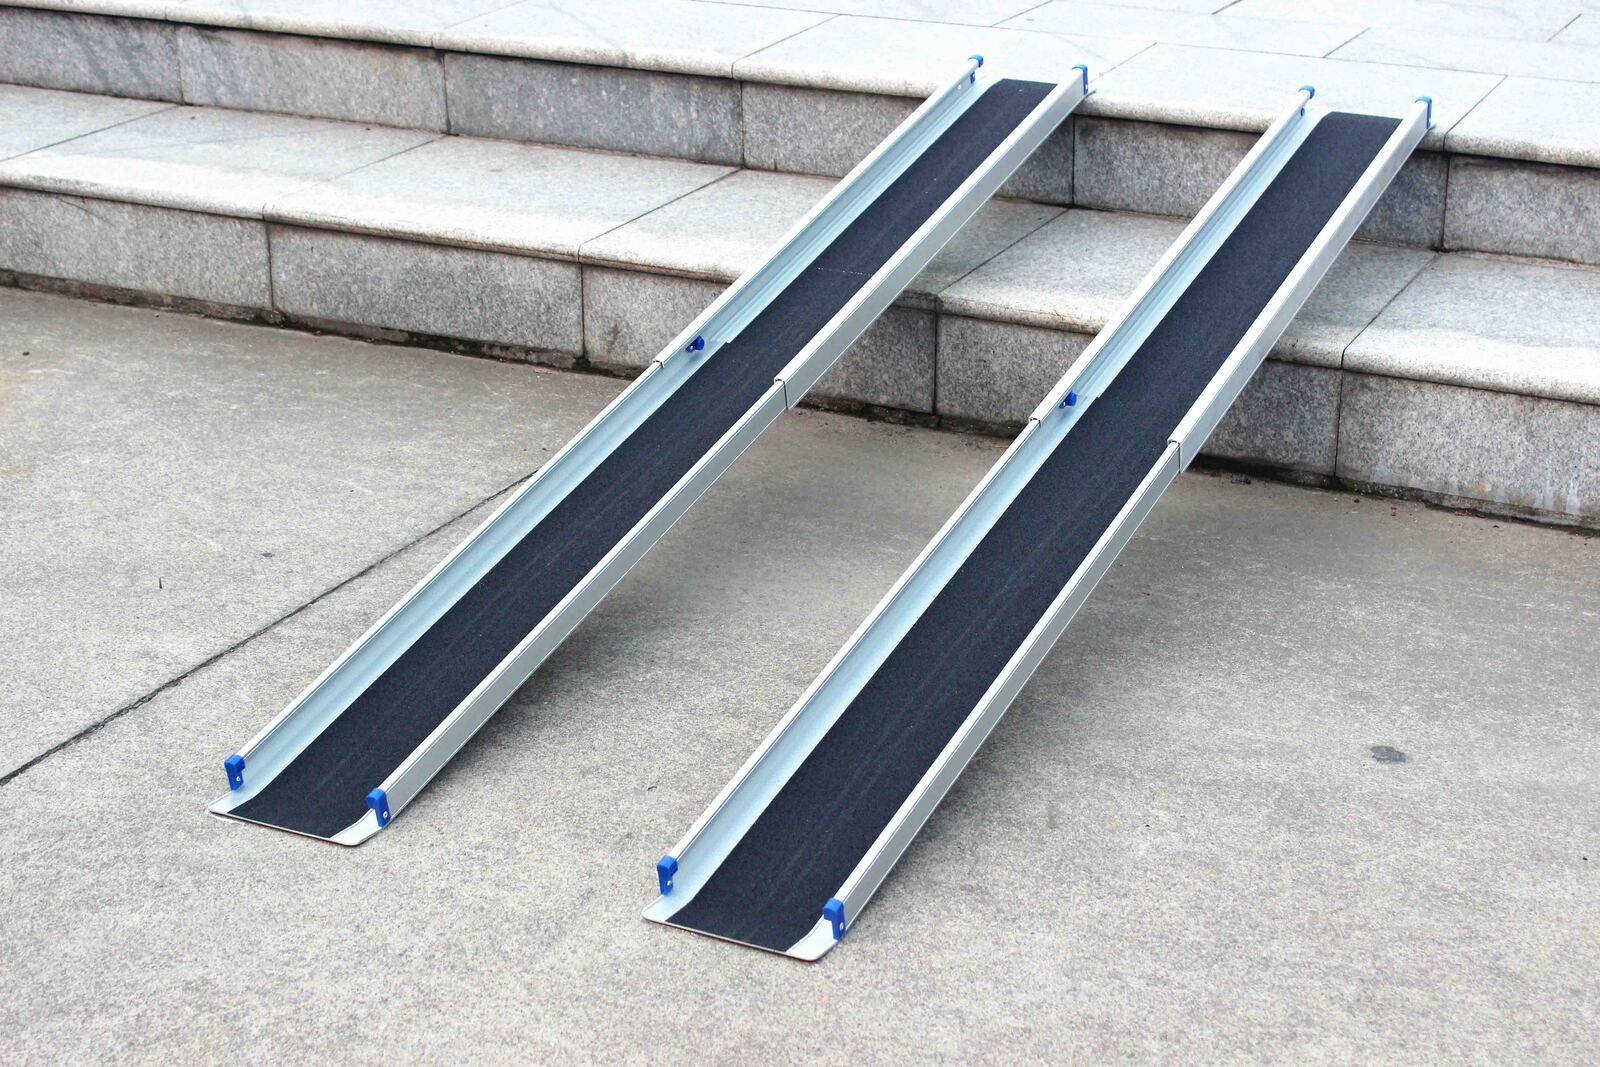 6 Foot Telescopic Wheelchair Ramp, How To Get A Wheelchair Ramp For Free In Nigeria